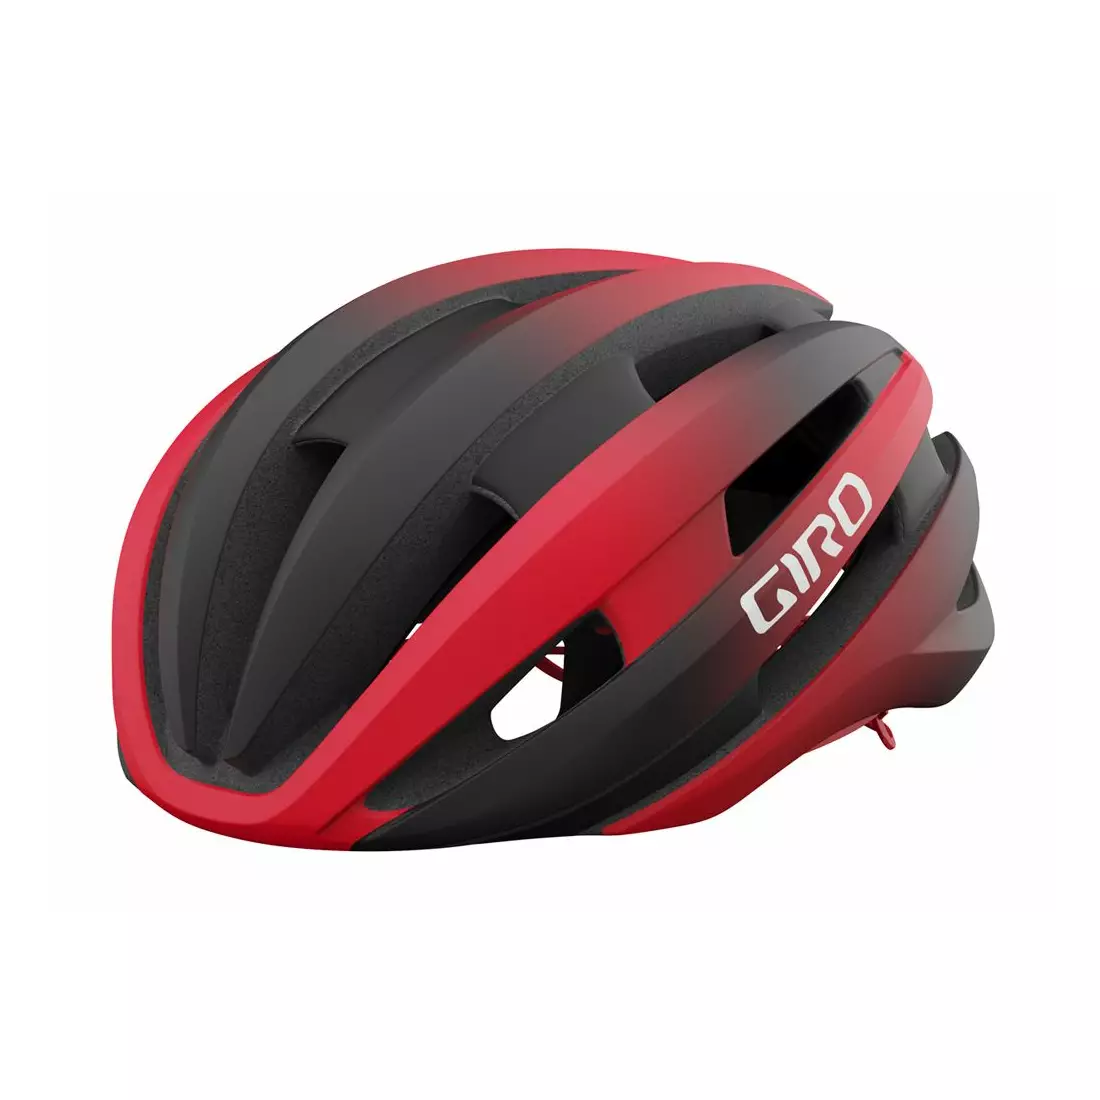 GIRO kask rowerowy szosowy SYNTHE INTEGRATED MIPS II matte black bright red GR-7130770